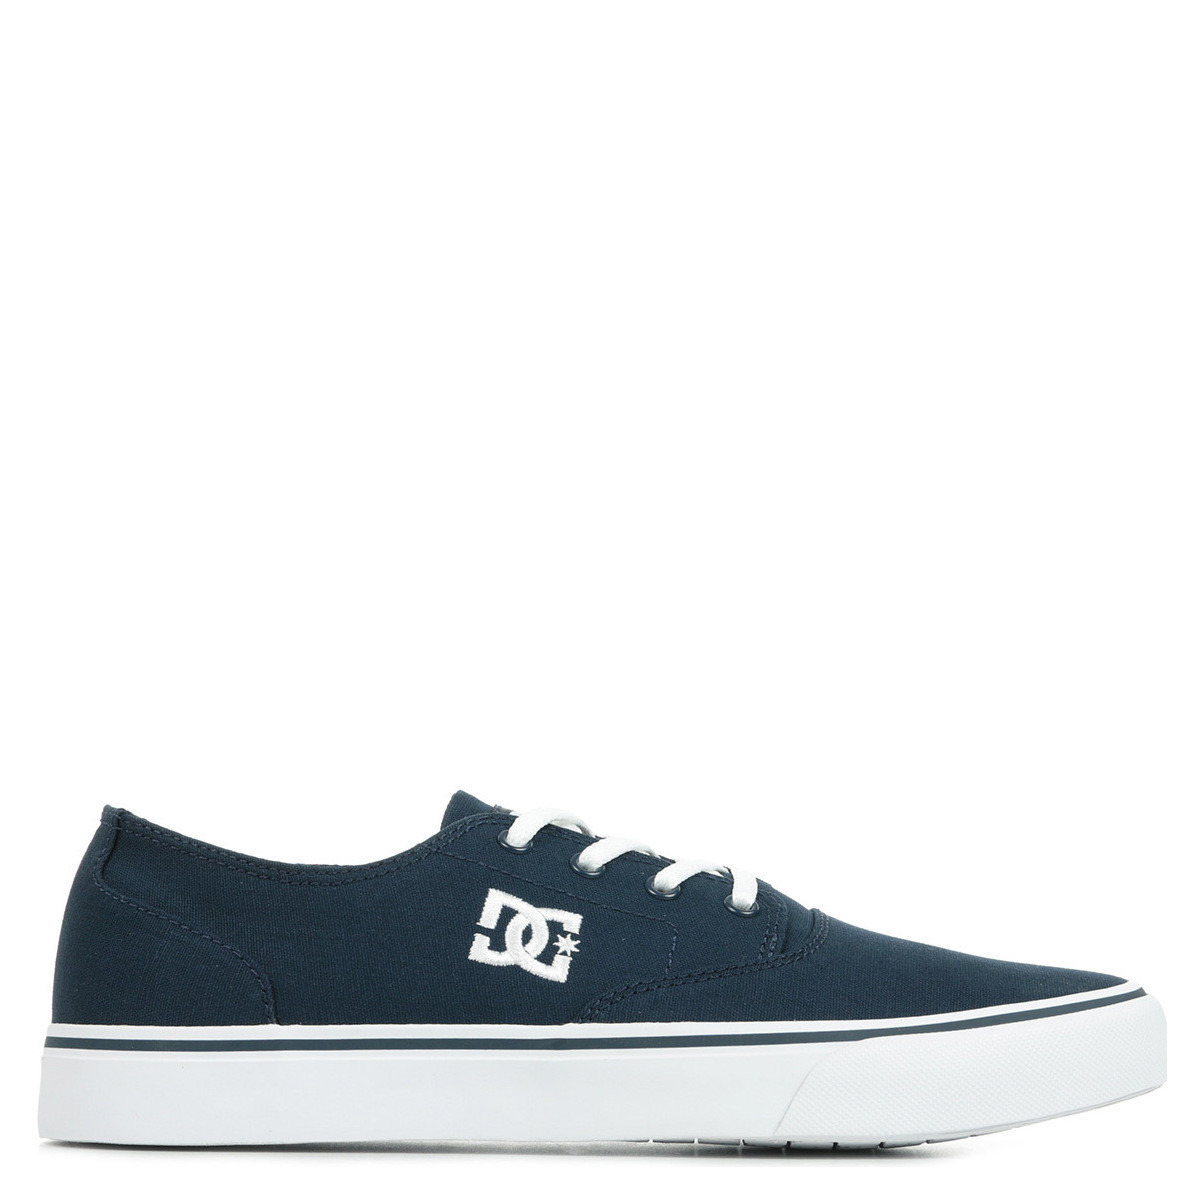 Dc Shoes - Man Blue Sneakers at Spartoo GOOFASH